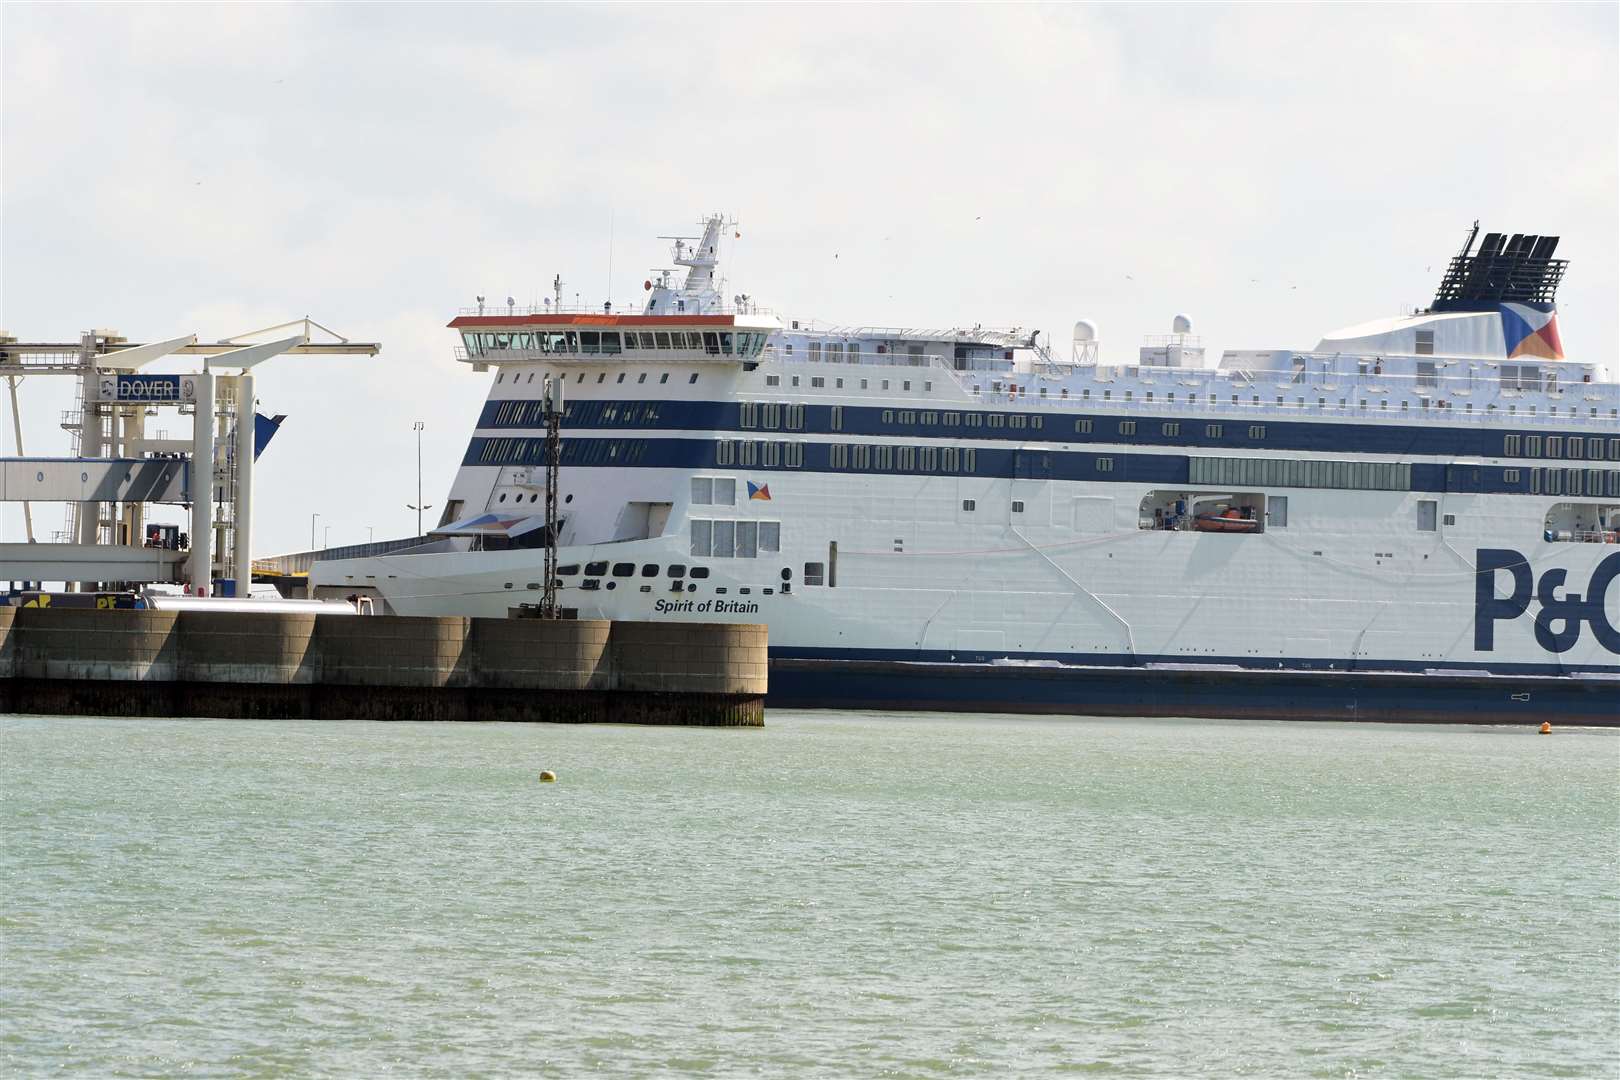 P&O Spirit of Britain this week returning to Dover after completing a sea trial to Calais and back. Picture: Barry Goodwin